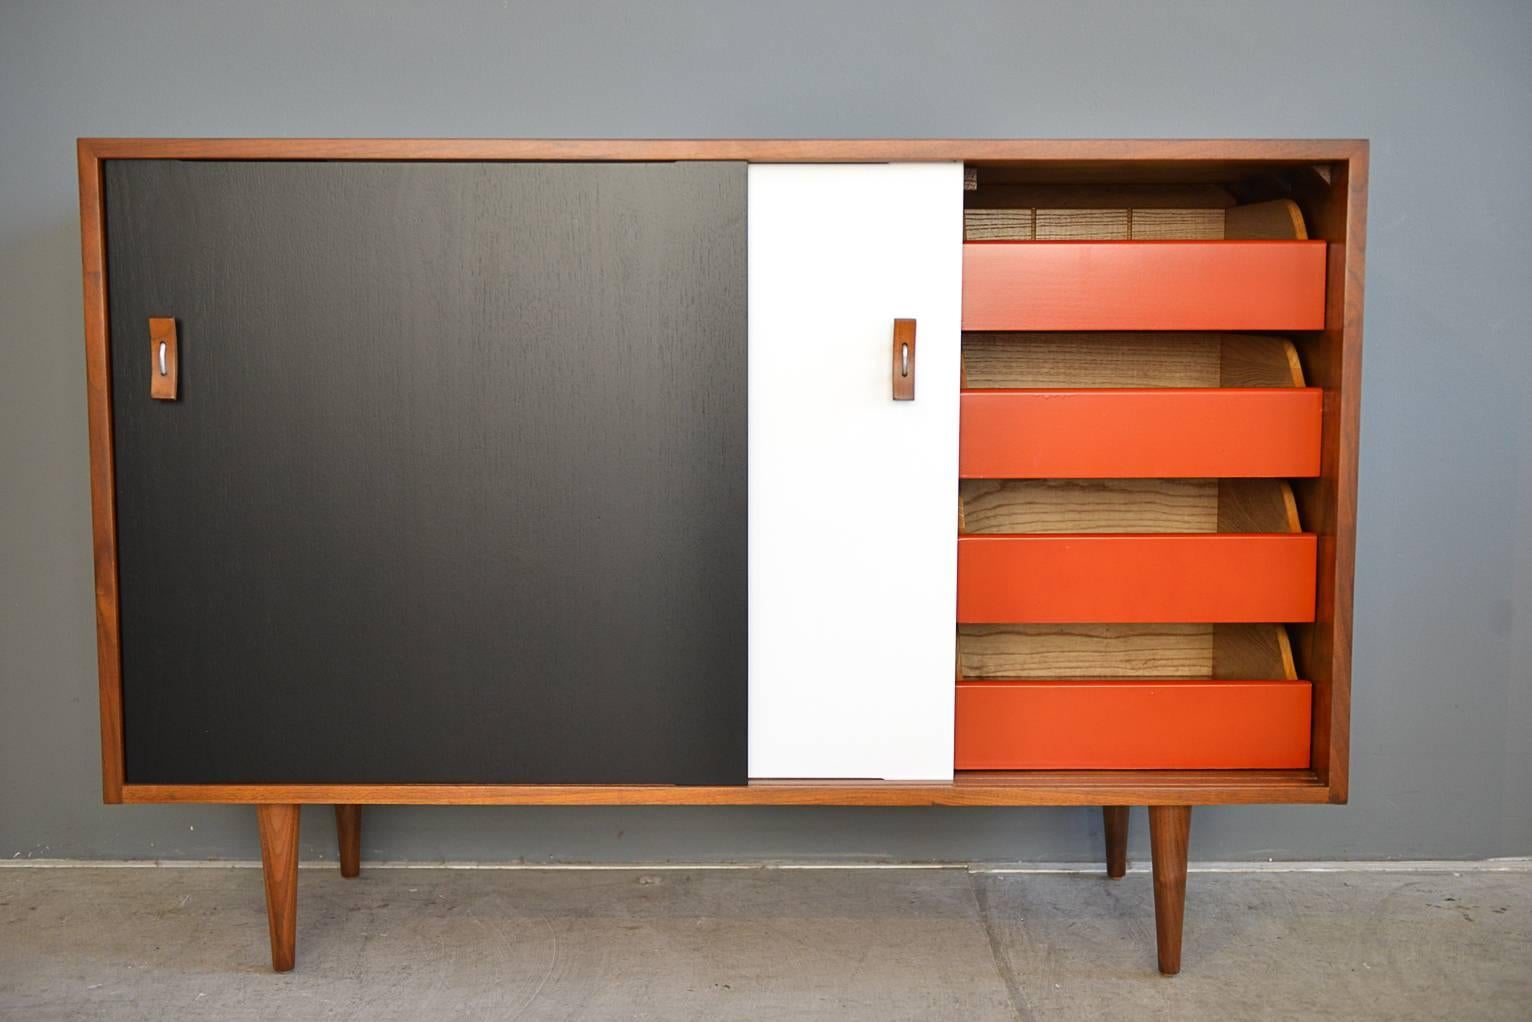 A new twist on a classic, this beautiful petite credenza has been professionally restored and updated with black and white sliding doors. Hardware is original as well as the red drawers behind the cabinet.

Showroom condition.

Measures: 48